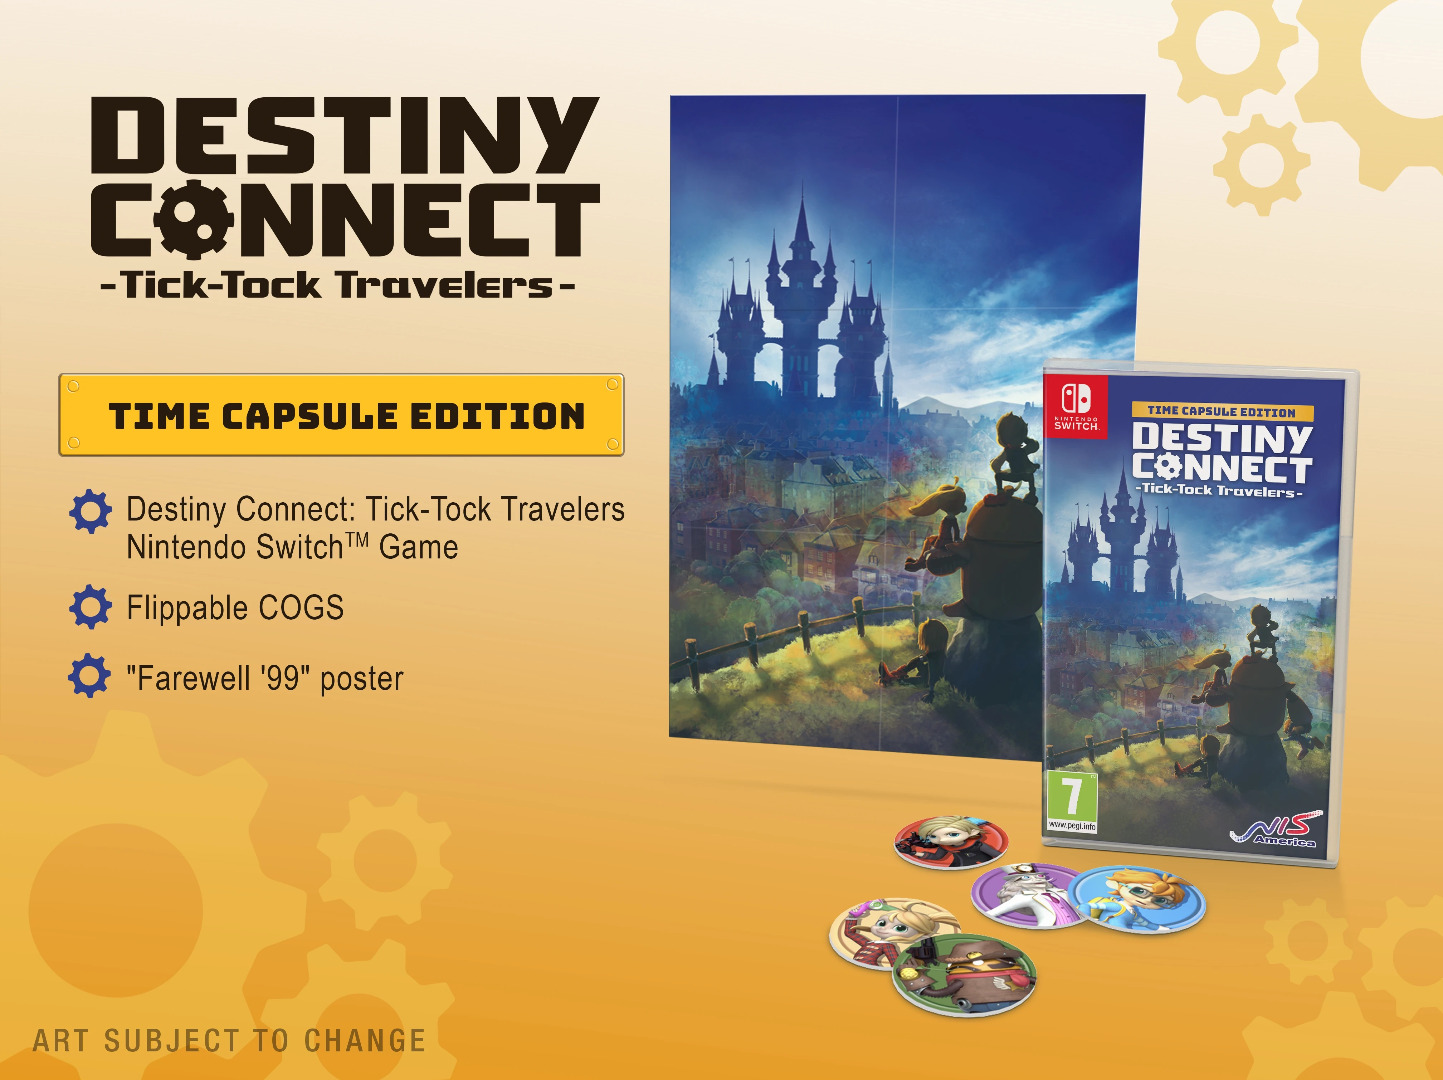 Destiny Connect: Tick-Tock Travelers - Time Capsule Edition Nintendo Switch